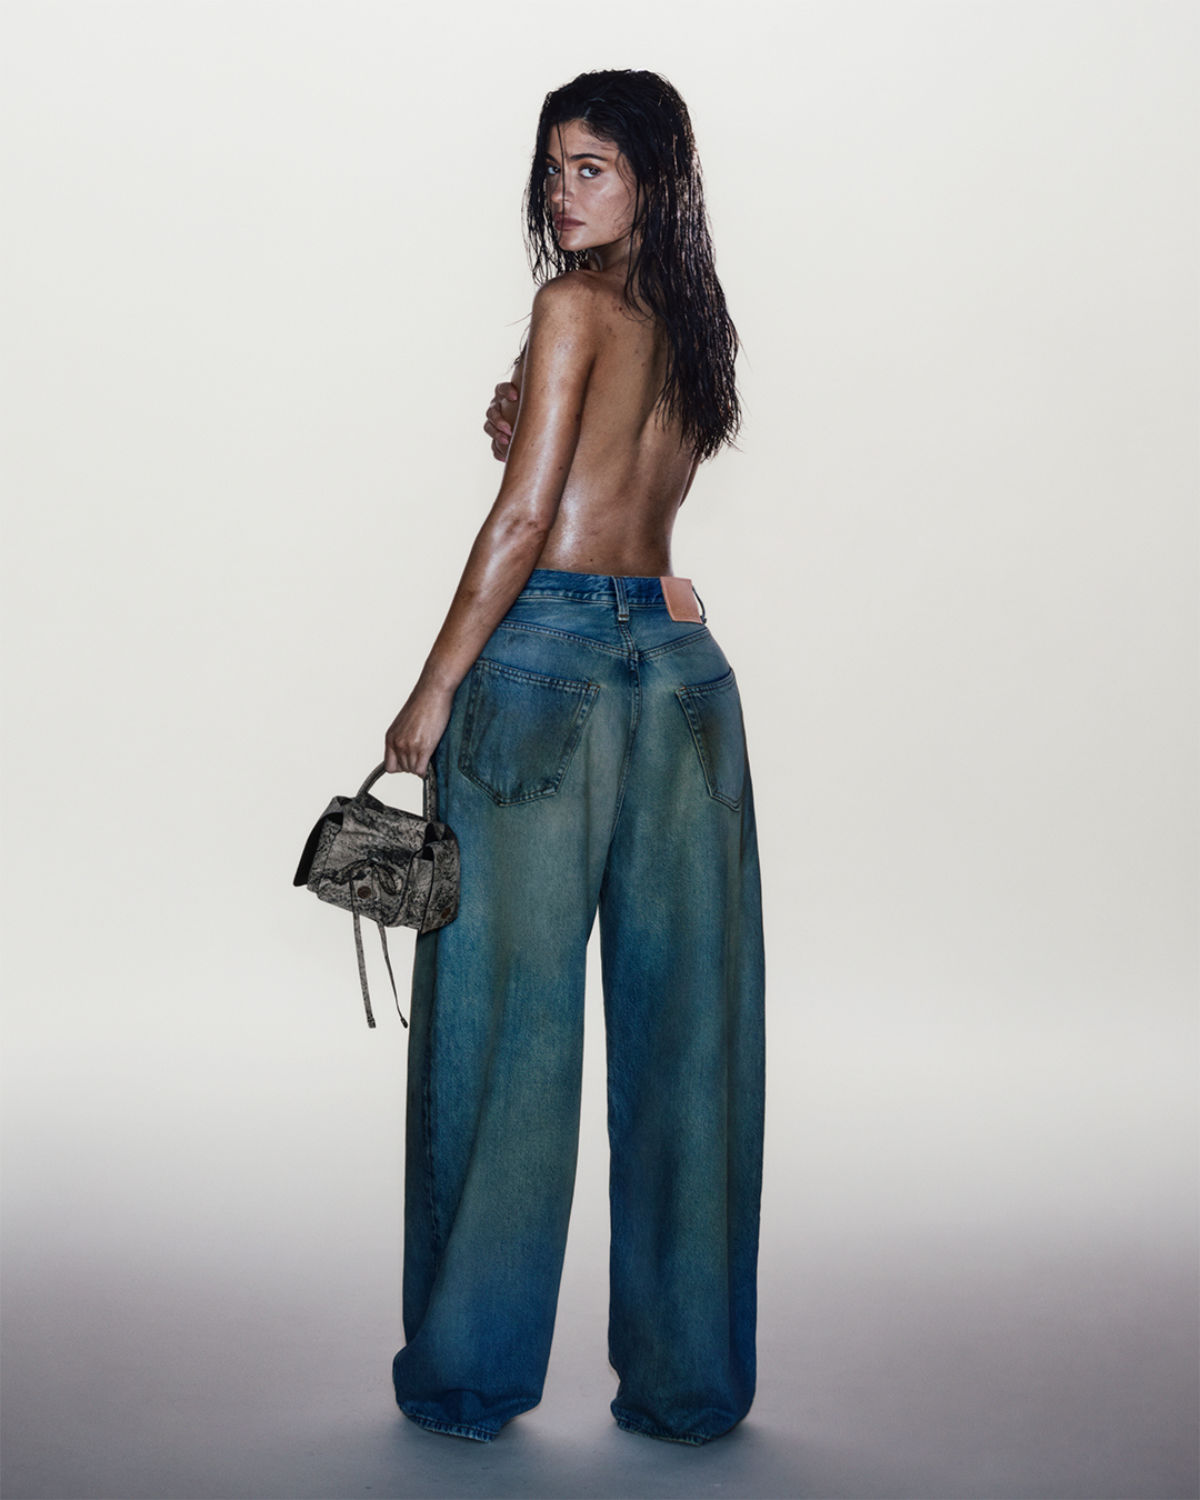 Kylie Jenner Fronts Acne Studios’ Fall Winter 23 Denim Campaign